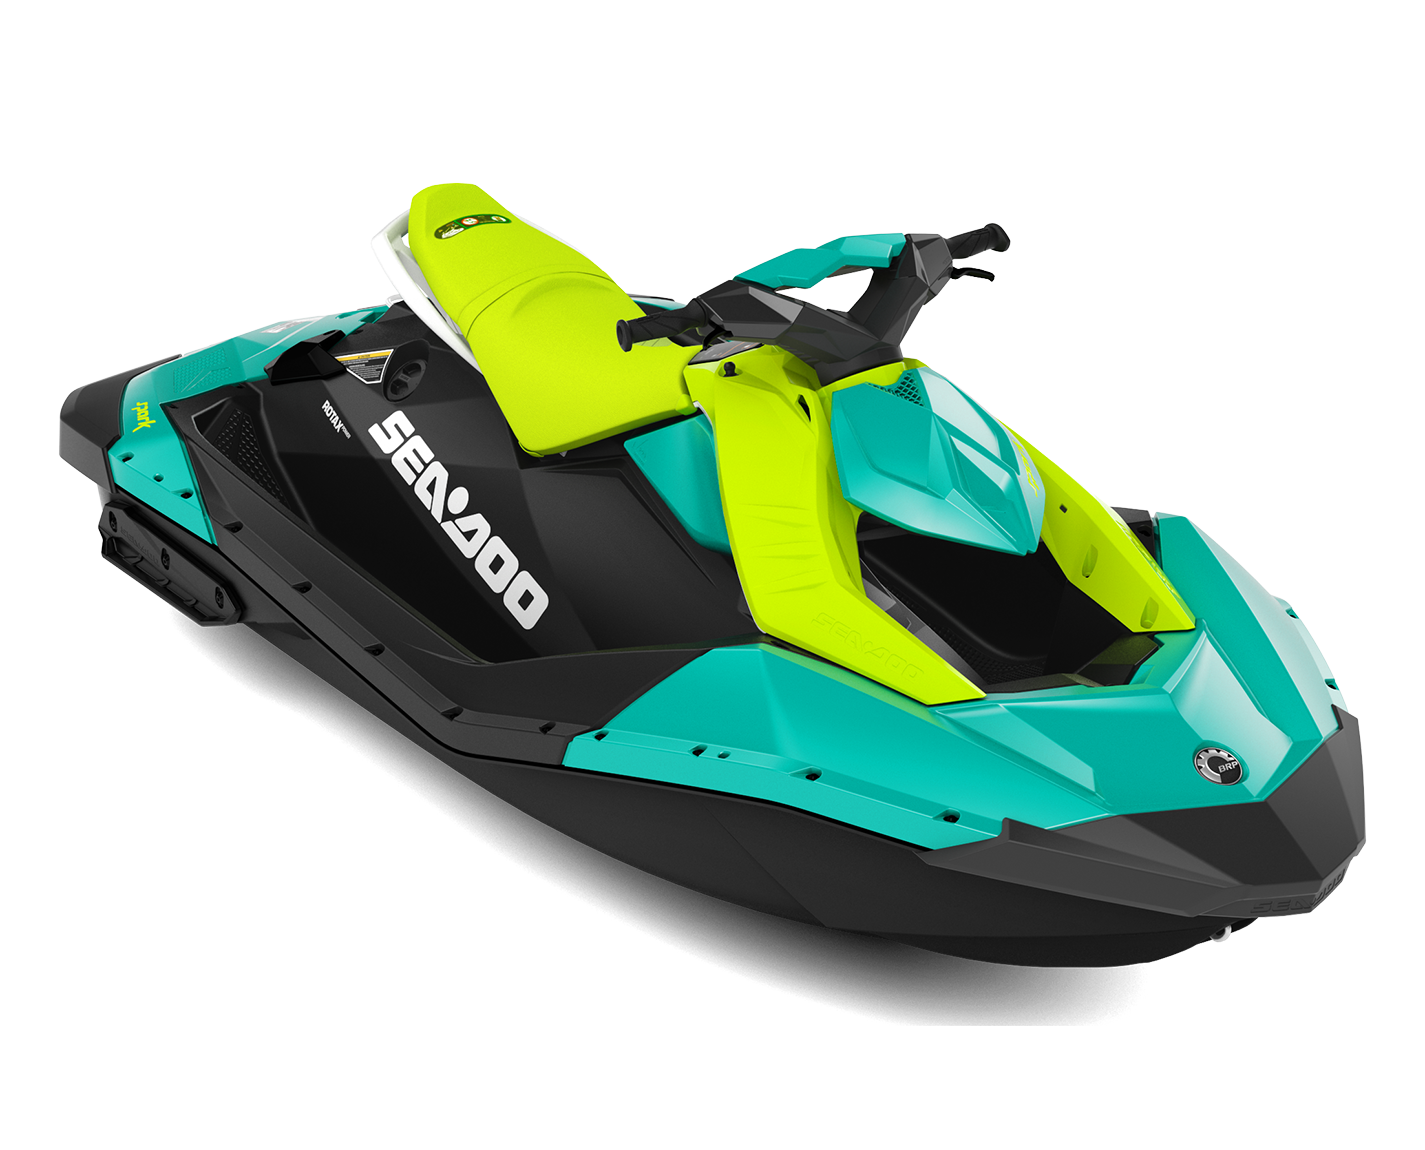 Sea-Doo SPARK 2up without sound system MY22 - Reef Blue / Manta Green